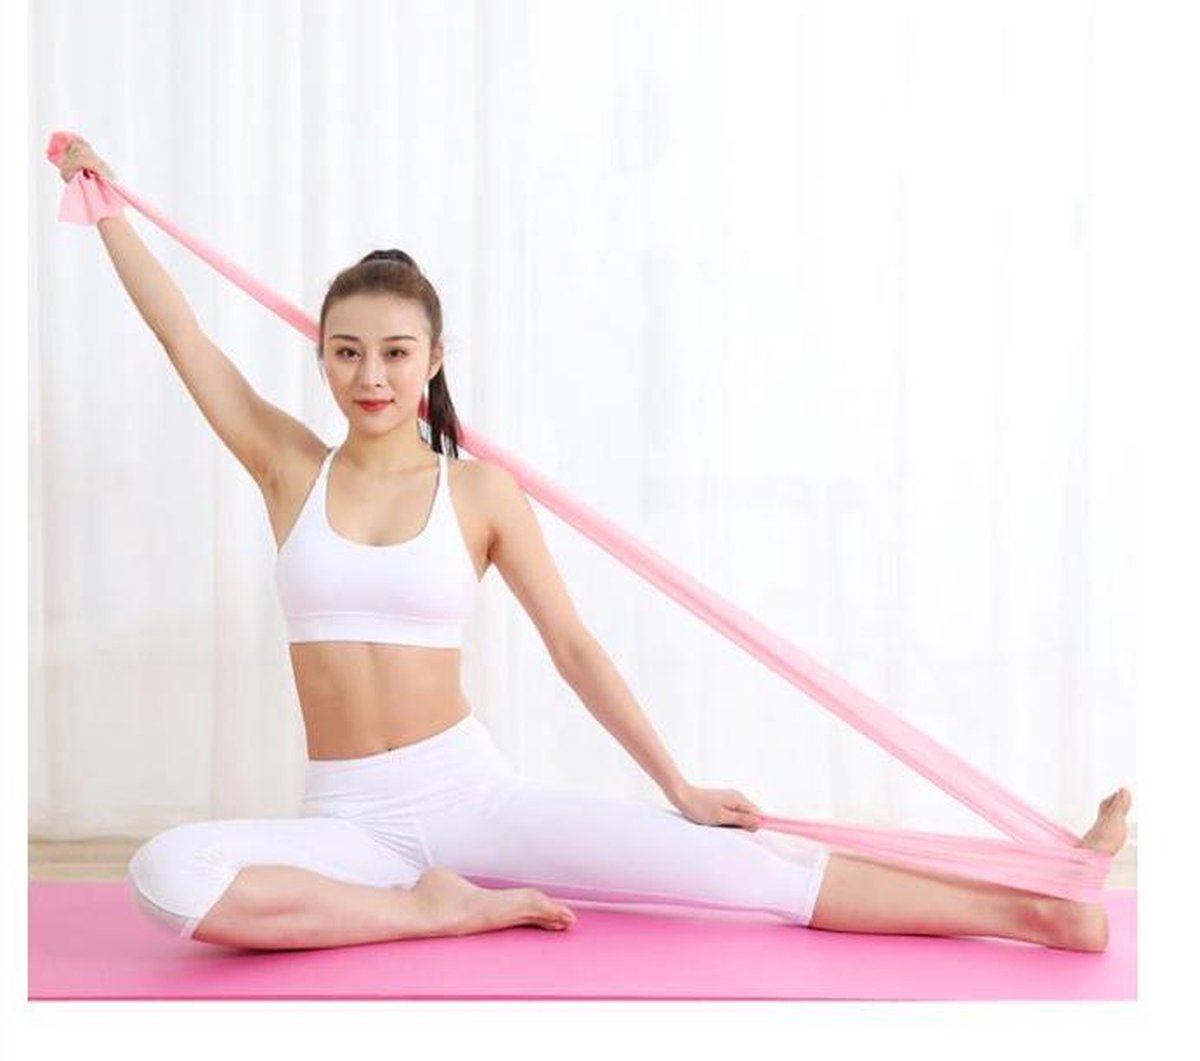 Weerstand Band - yoga band- yoga - Lengte 1,5 meter - Sporten - Thuis sporten - Roze - Resistance band - Exercise at home